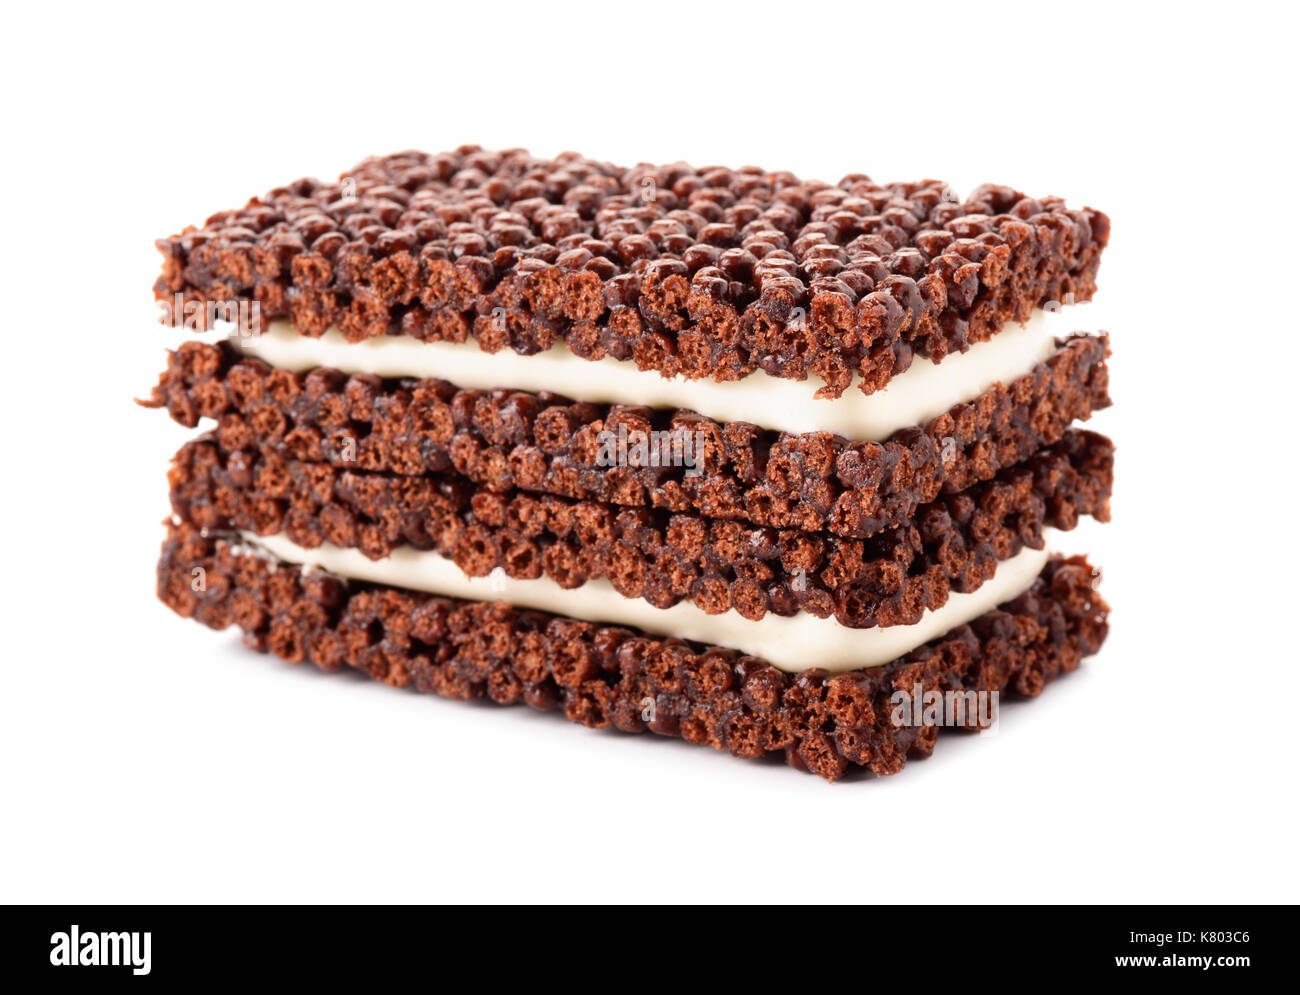 Delicious and healthy chocolate bar with muesli and cream isolated on a white background Stock Photo